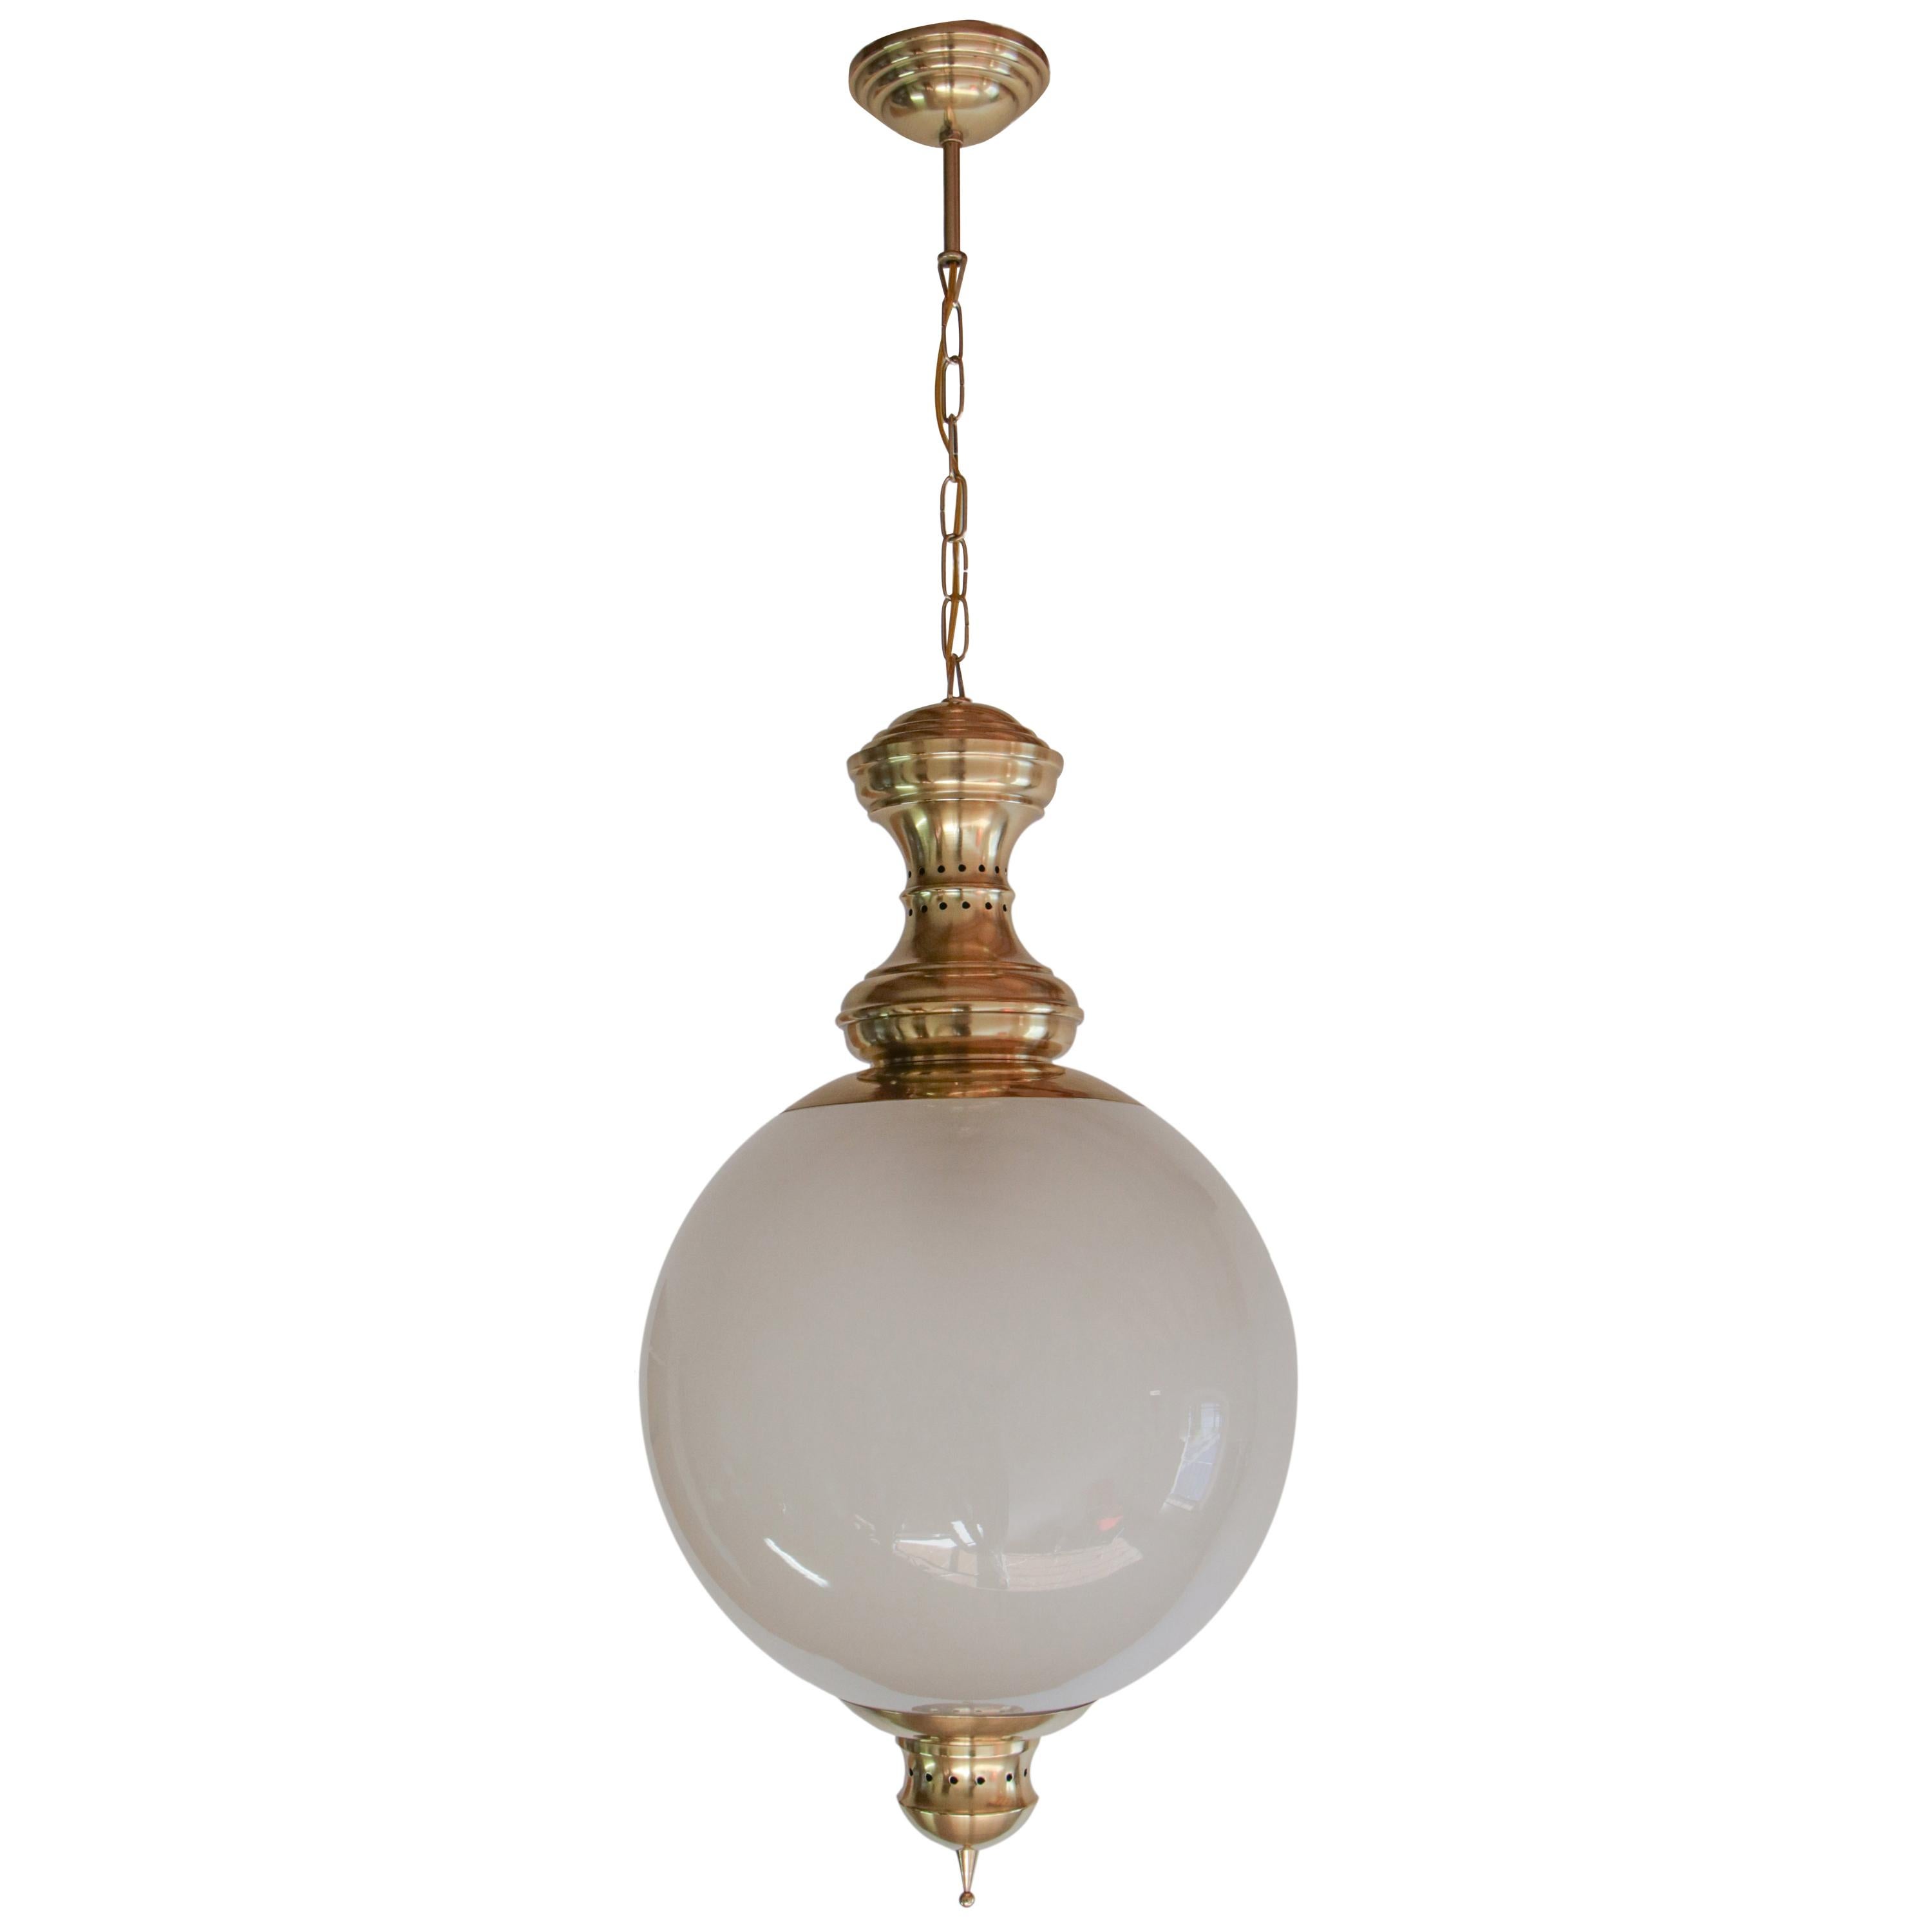 Charming Italian Mid-Century Modern pendant lamp designed by Luigi Caccia Dominioni for Azucena fashion house in the 1950s.
Model LS1, made of blown frosted glass and polished brass structure. The restoration of this mid-century 